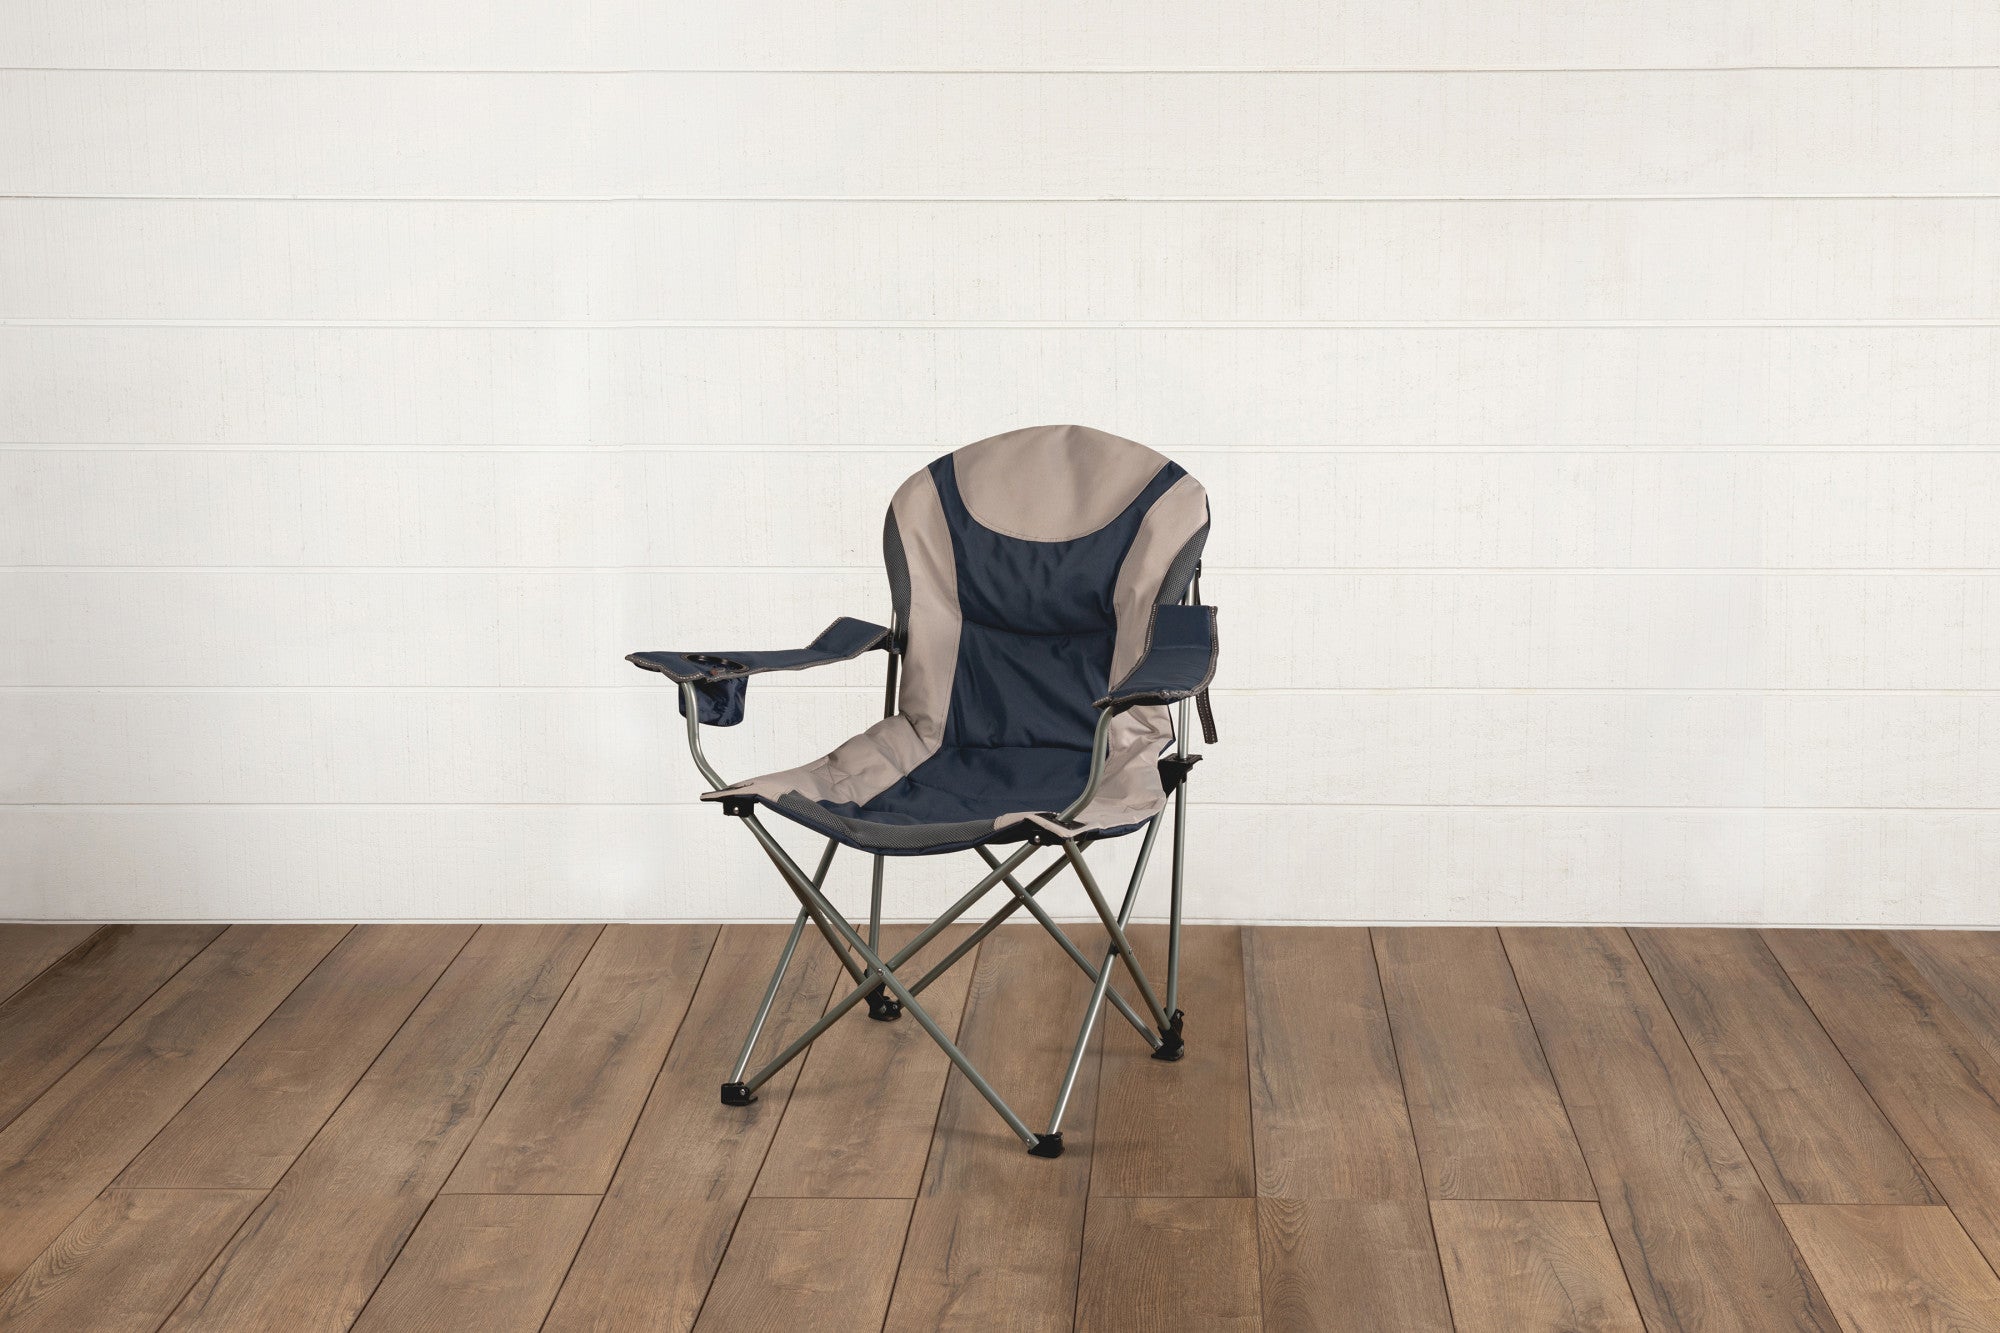 Boston Red Sox - Reclining Camp Chair